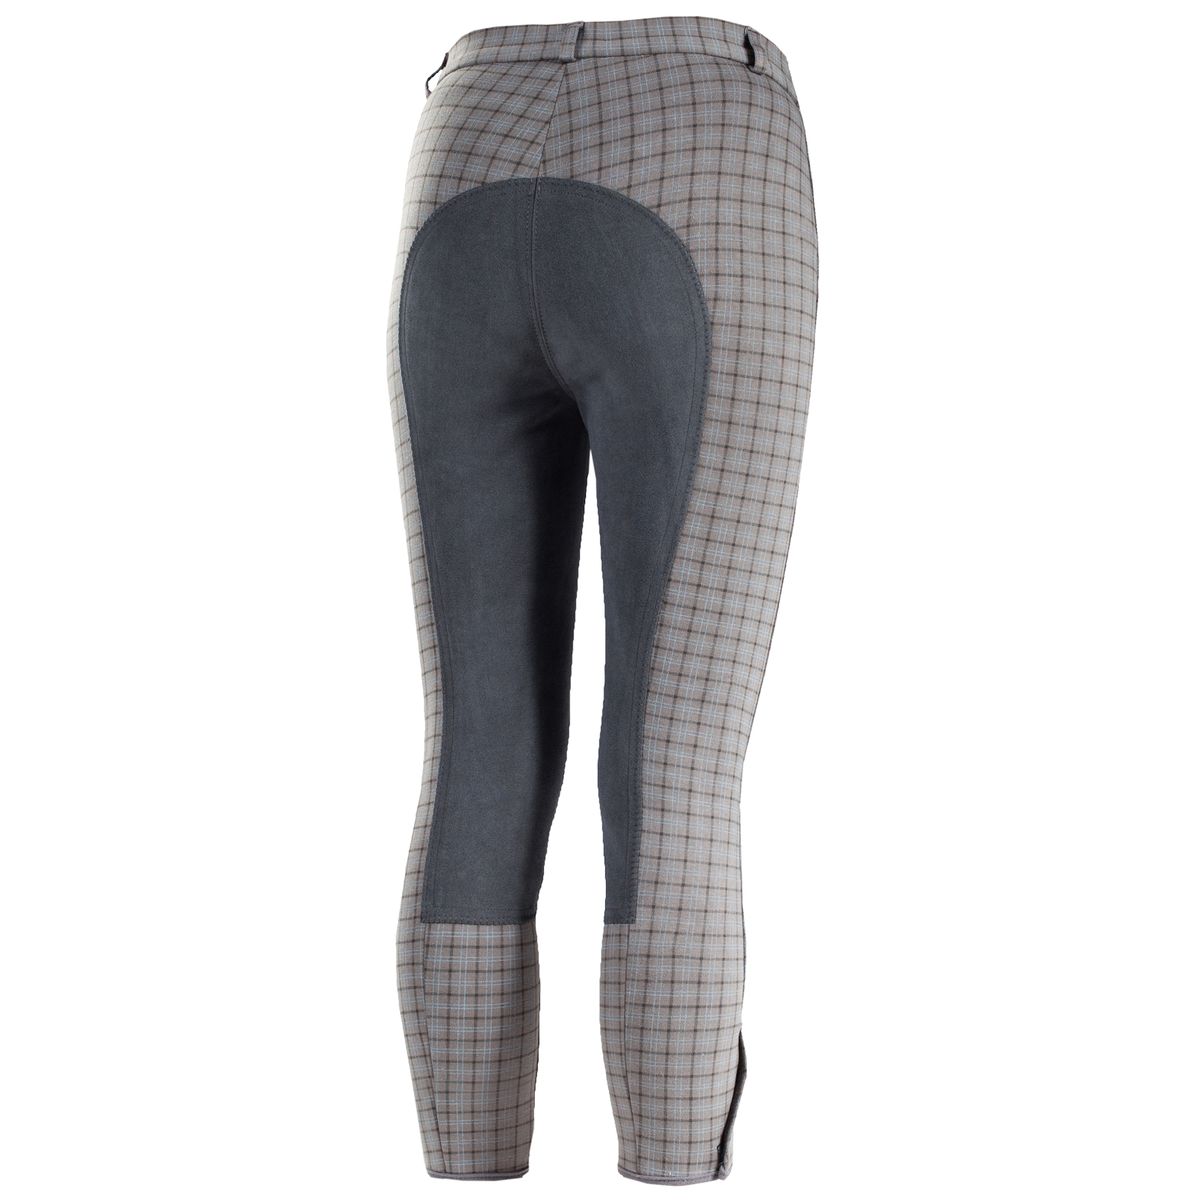       Slim Fit Checked Breeches